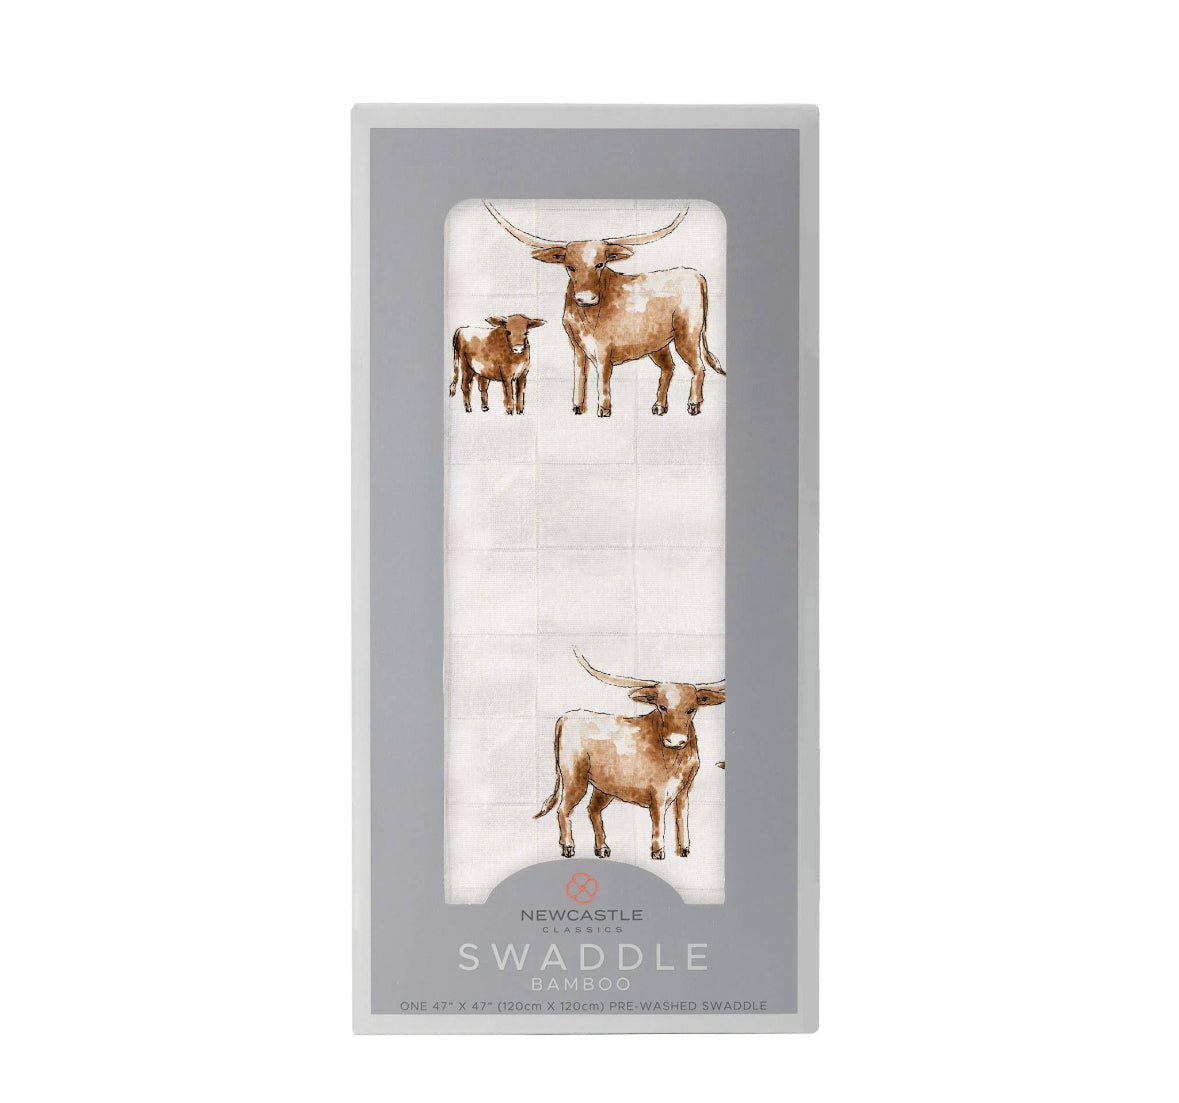 Western Swaddle baby blankets